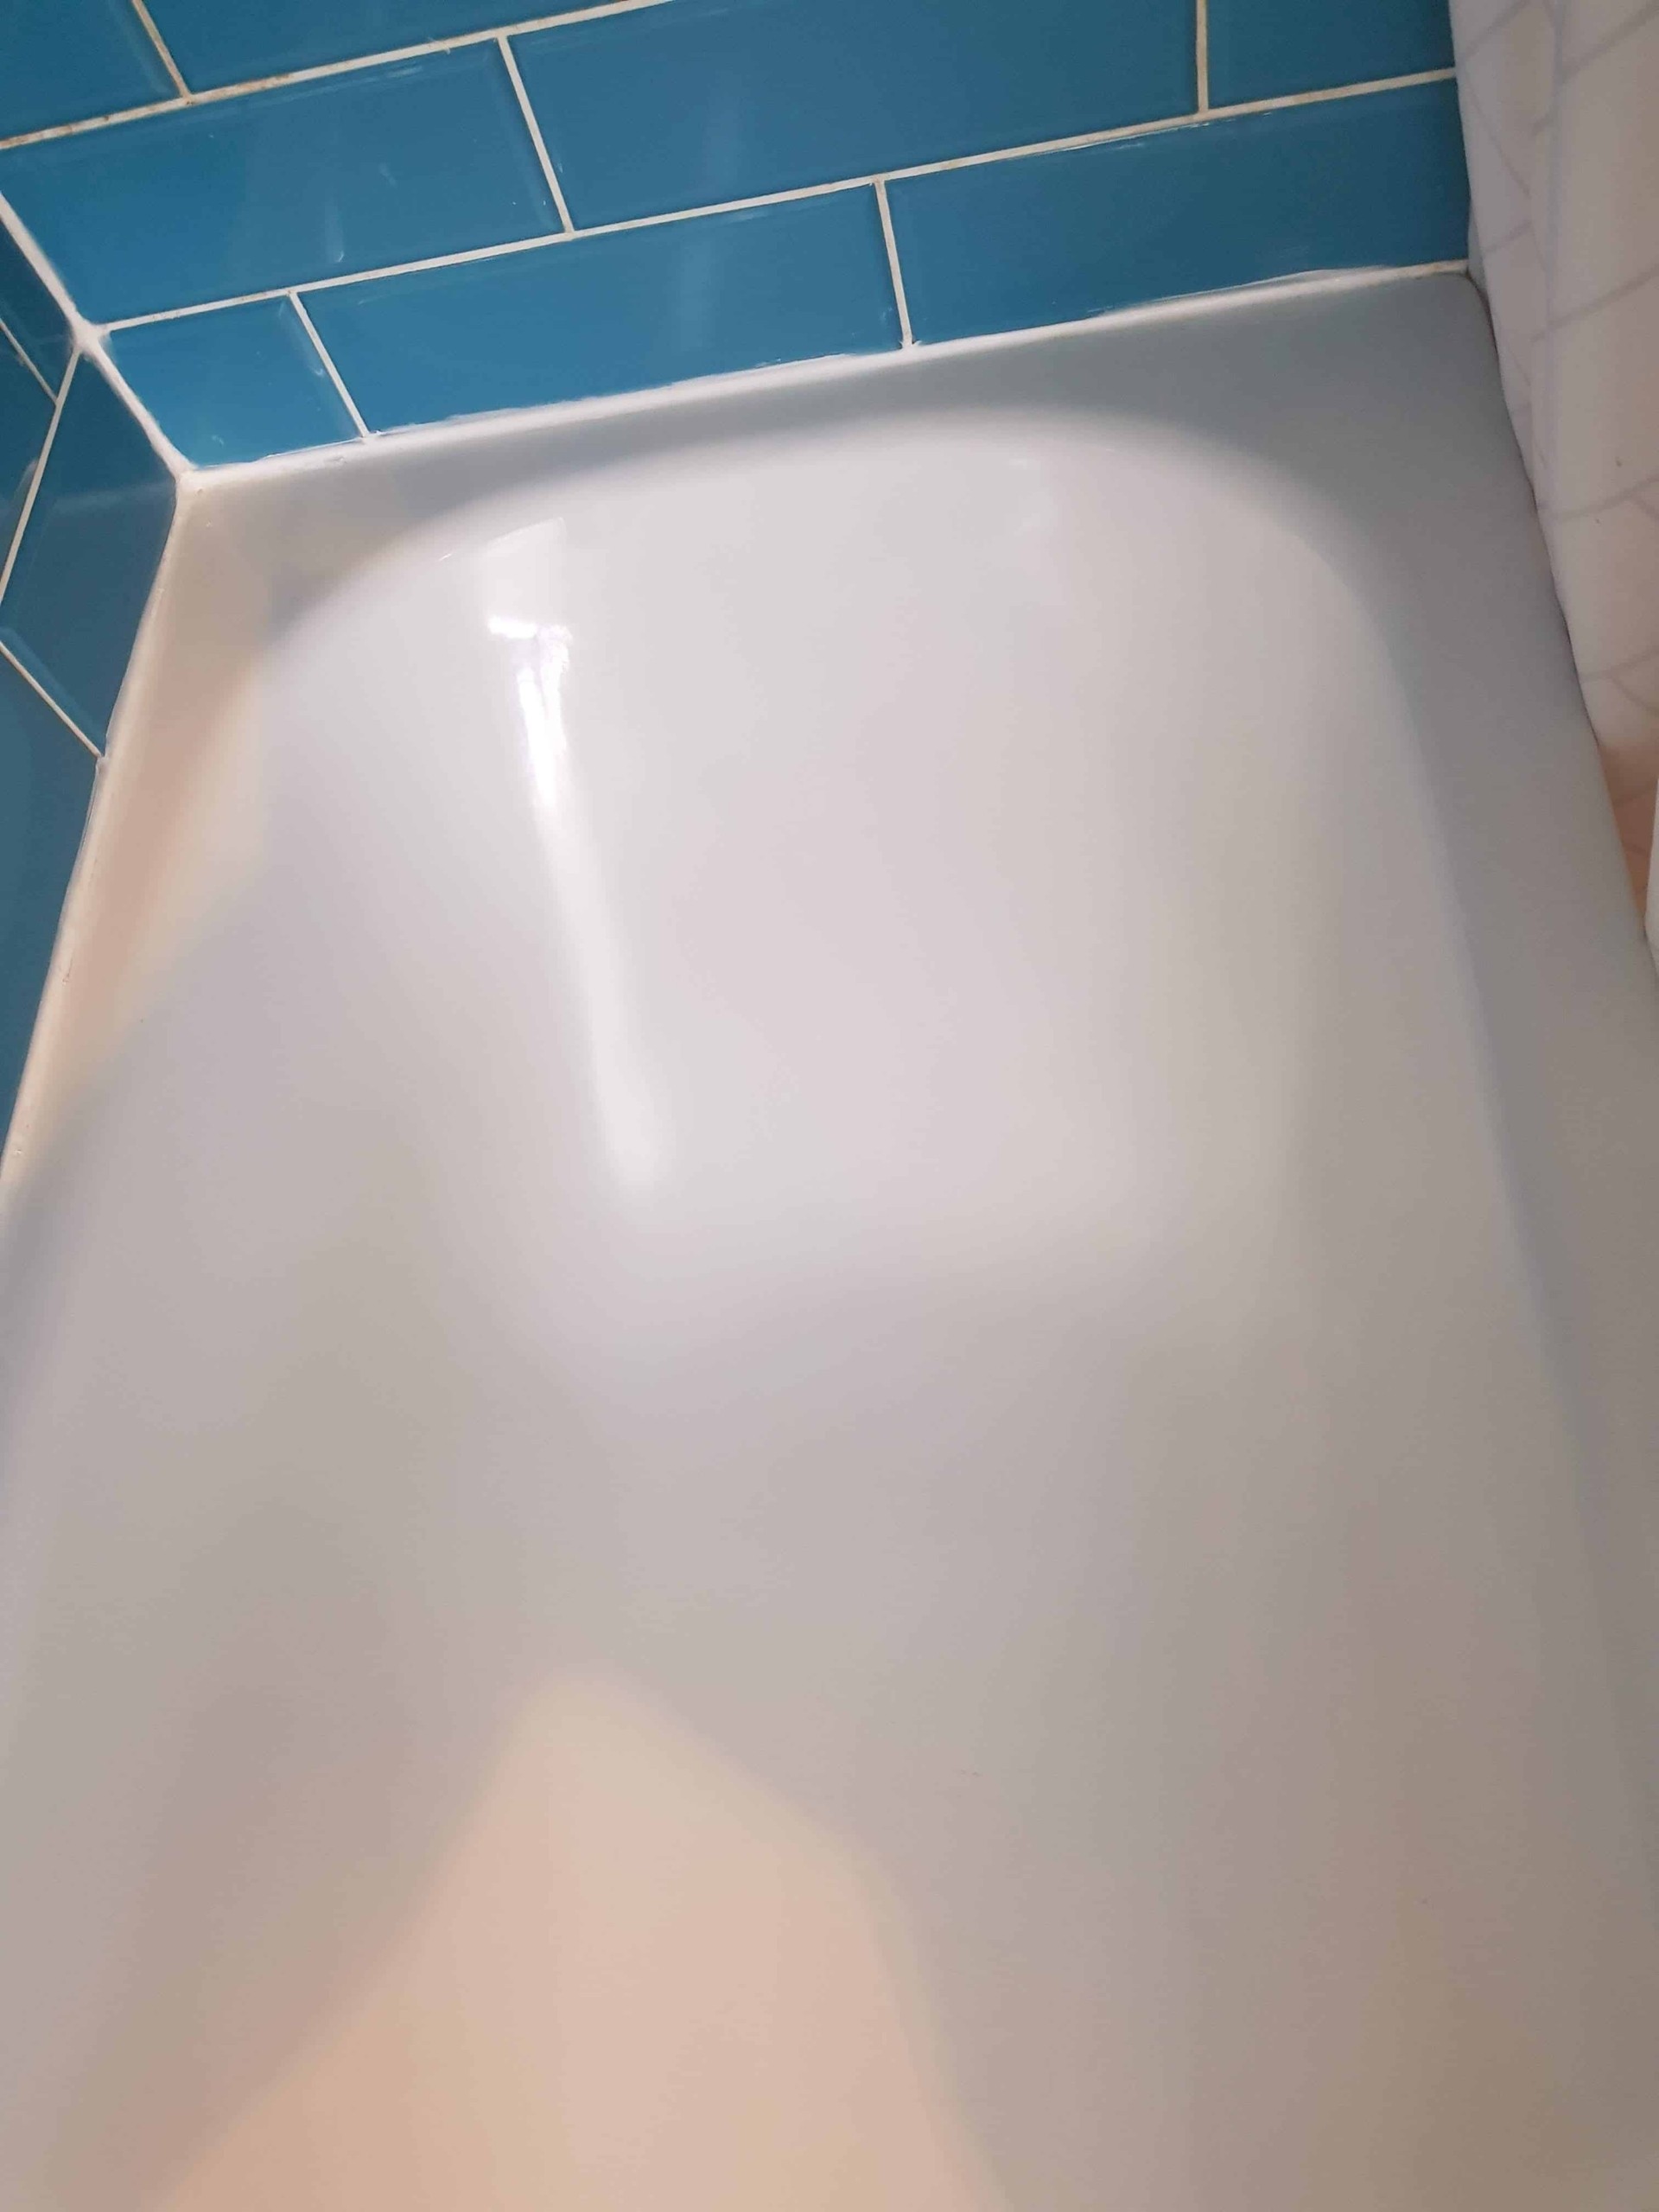 5 examples of time and cost effective bath enamel repair. 29